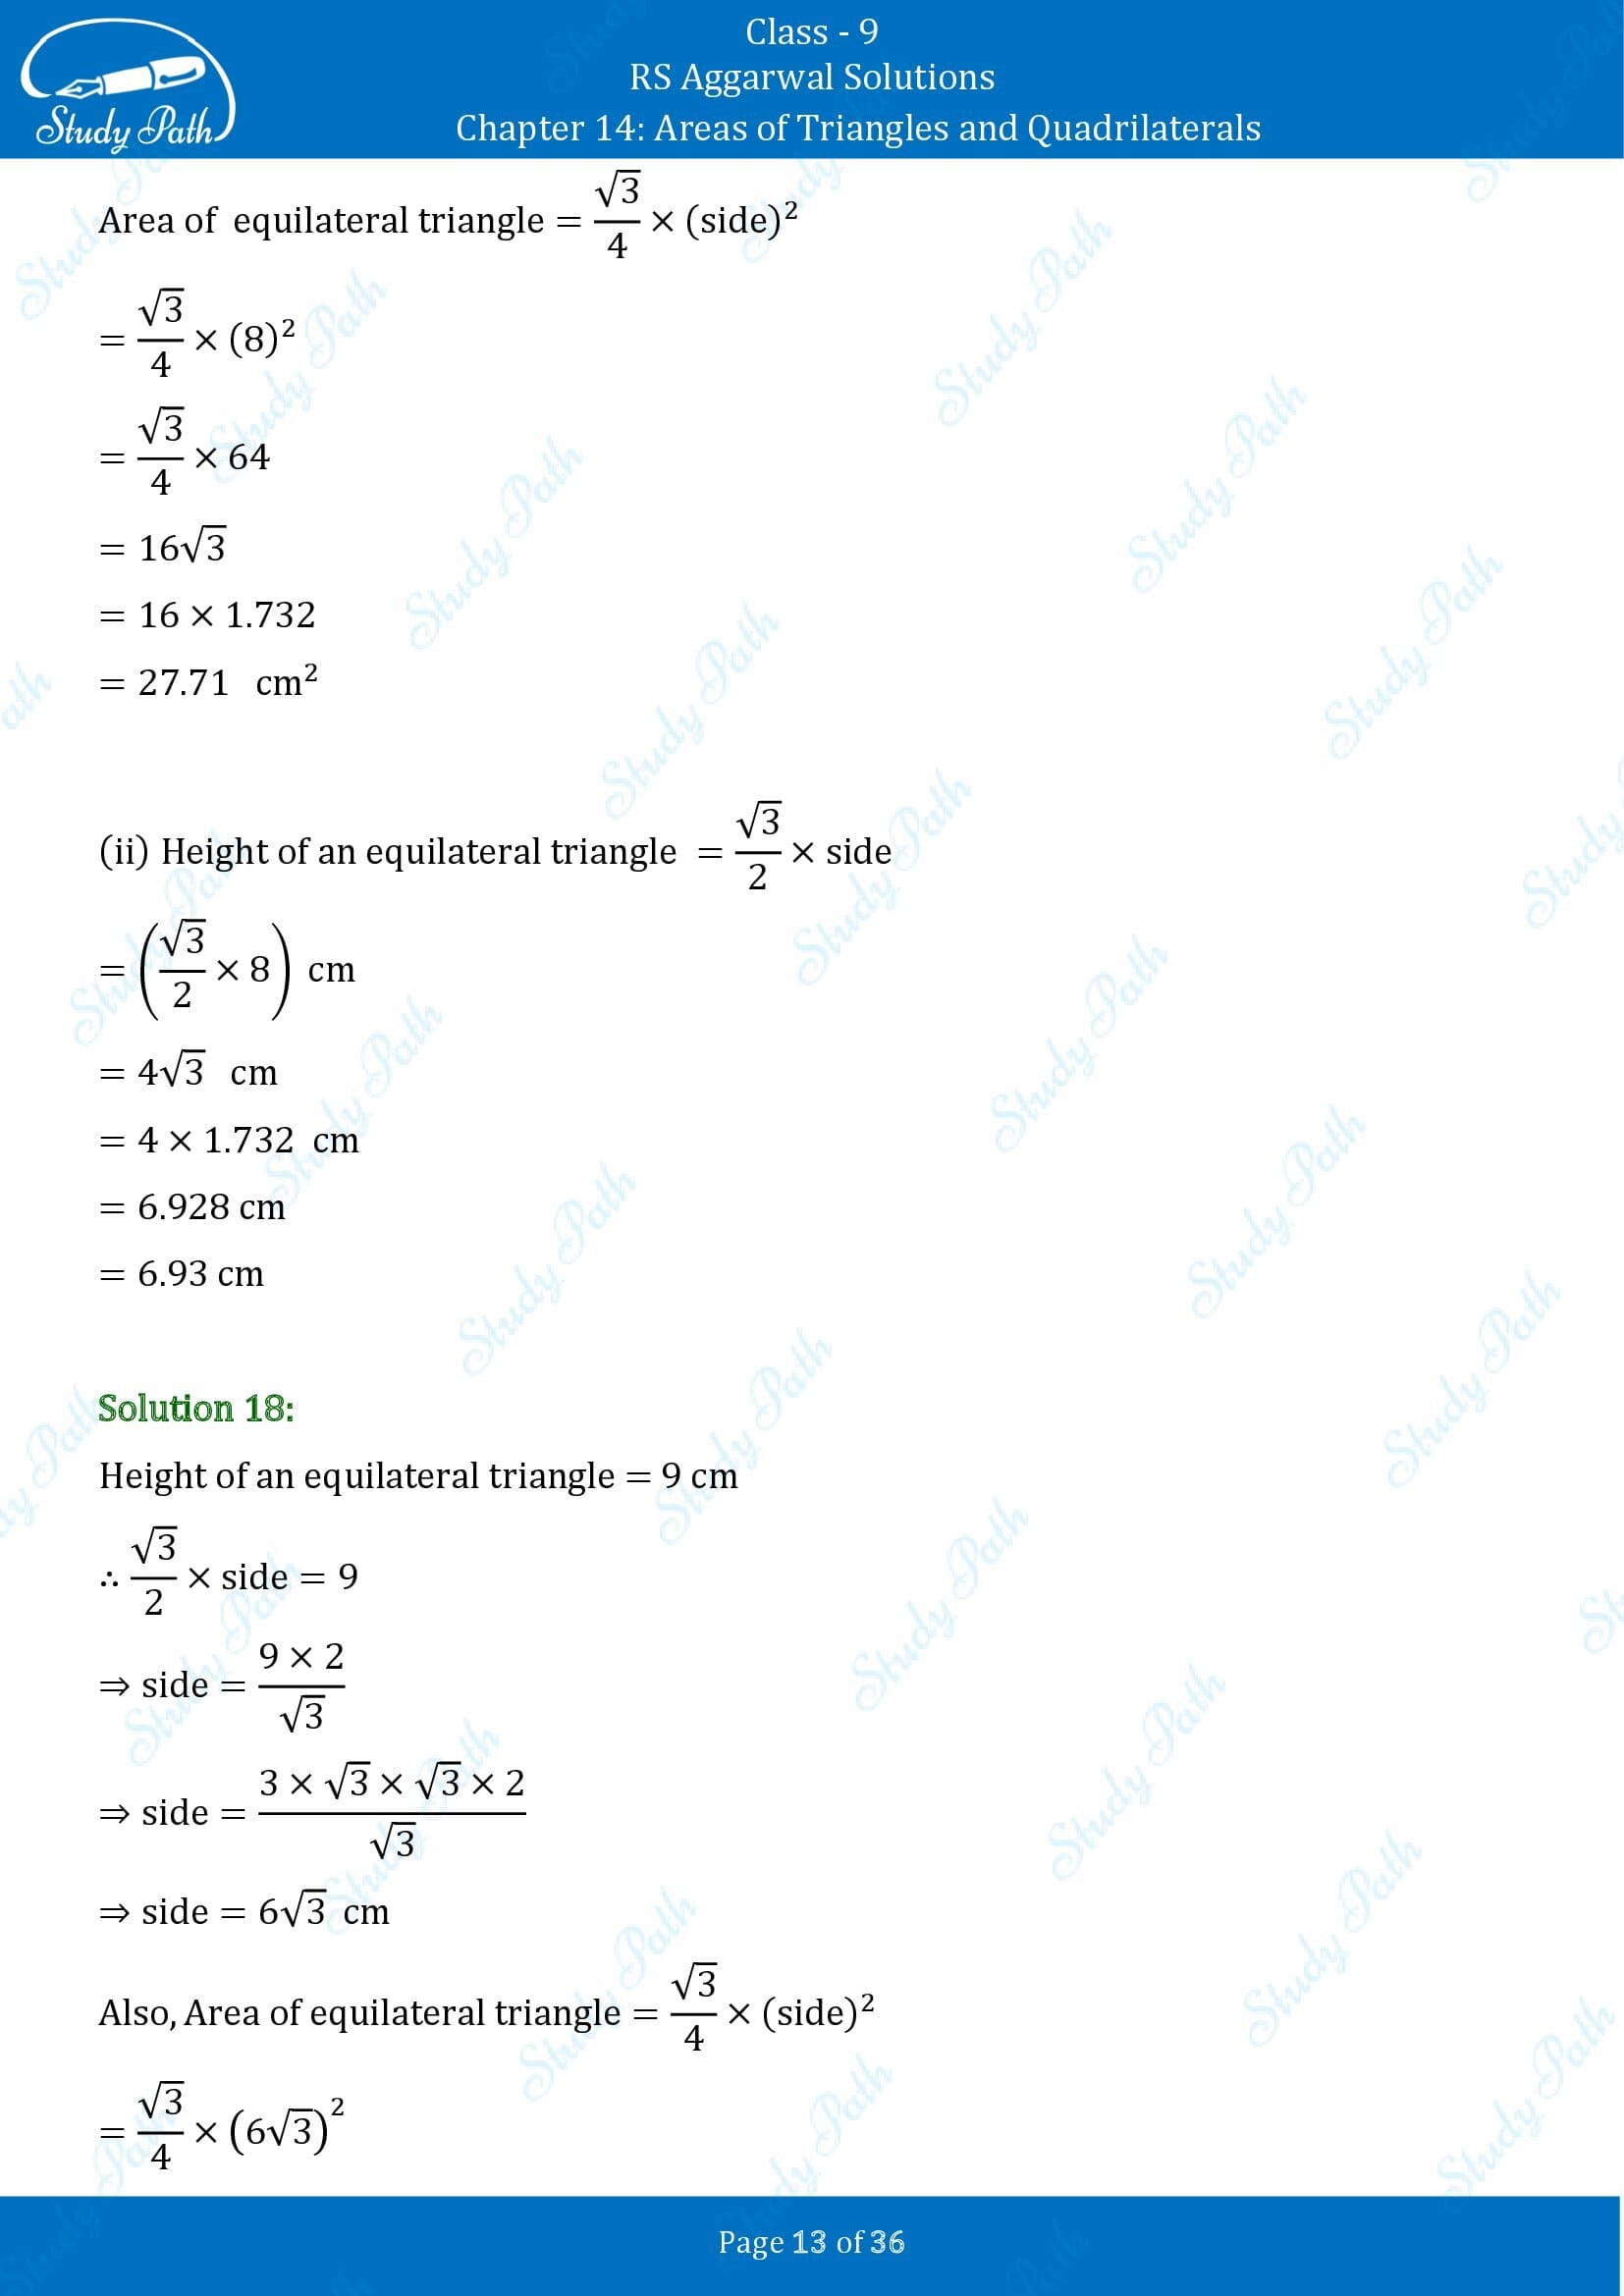 RS Aggarwal Solutions Class 9 Chapter 14 Areas of Triangles and Quadrilaterals Exercise 14 00013